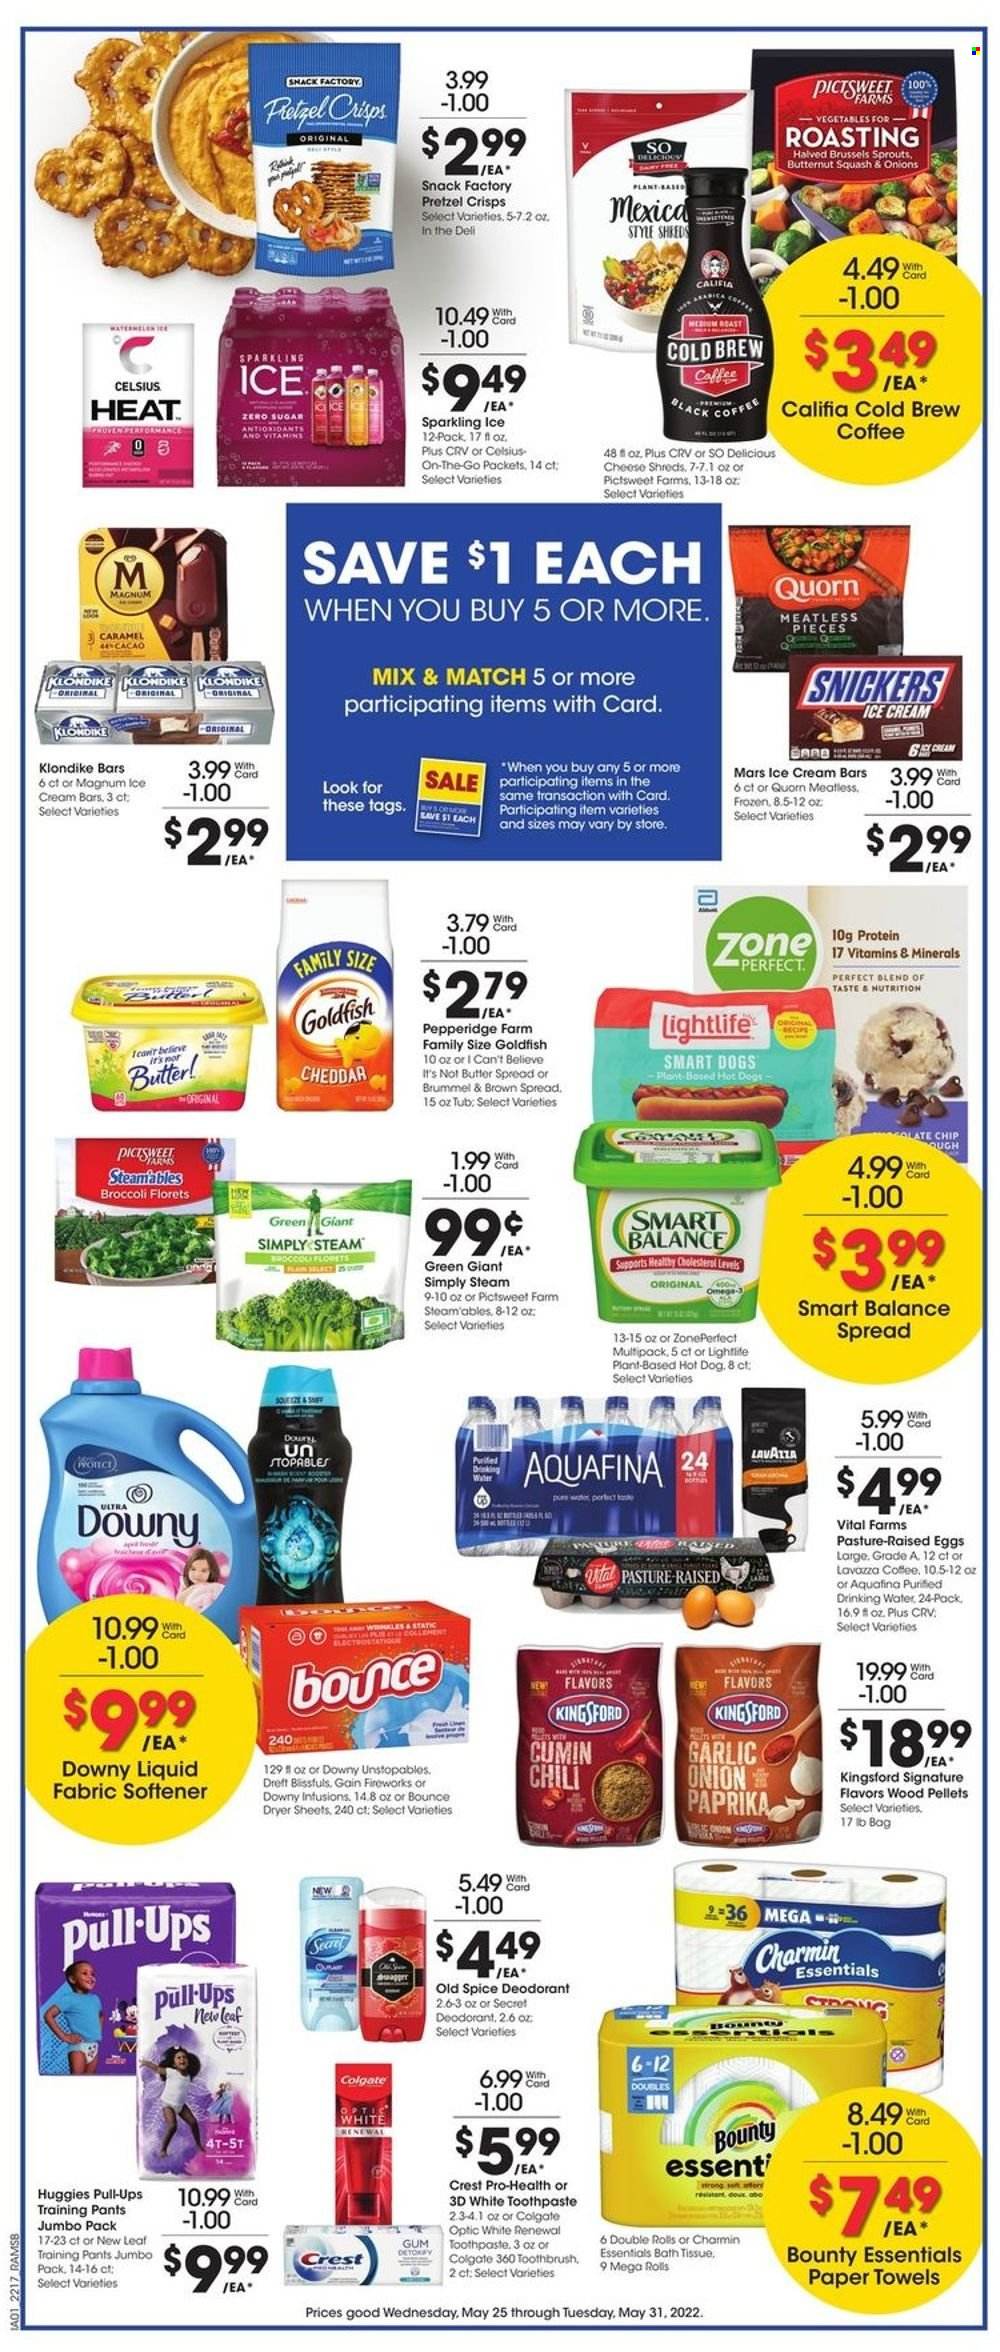 thumbnail - Ralphs Flyer - 05/25/2022 - 05/31/2022 - Sales products - broccoli, garlic, onion, brussel sprouts, hot dog, cheese, eggs, I Can't Believe It's Not Butter, Magnum, ice cream, ice cream bars, snack, Snickers, Bounty, Mars, Goldfish, pretzel crisps, Zone Perfect, spice, cumin, Aquafina, purified water, coffee, Lavazza, Huggies, pants, baby pants, bath tissue, kitchen towels, paper towels, Charmin, Gain, Unstopables, fabric softener, Bounce, dryer sheets, Gain Fireworks, Downy Laundry, Old Spice, Colgate, toothbrush, toothpaste, Crest, anti-perspirant, deodorant, Kingsford, butternut squash. Page 4.